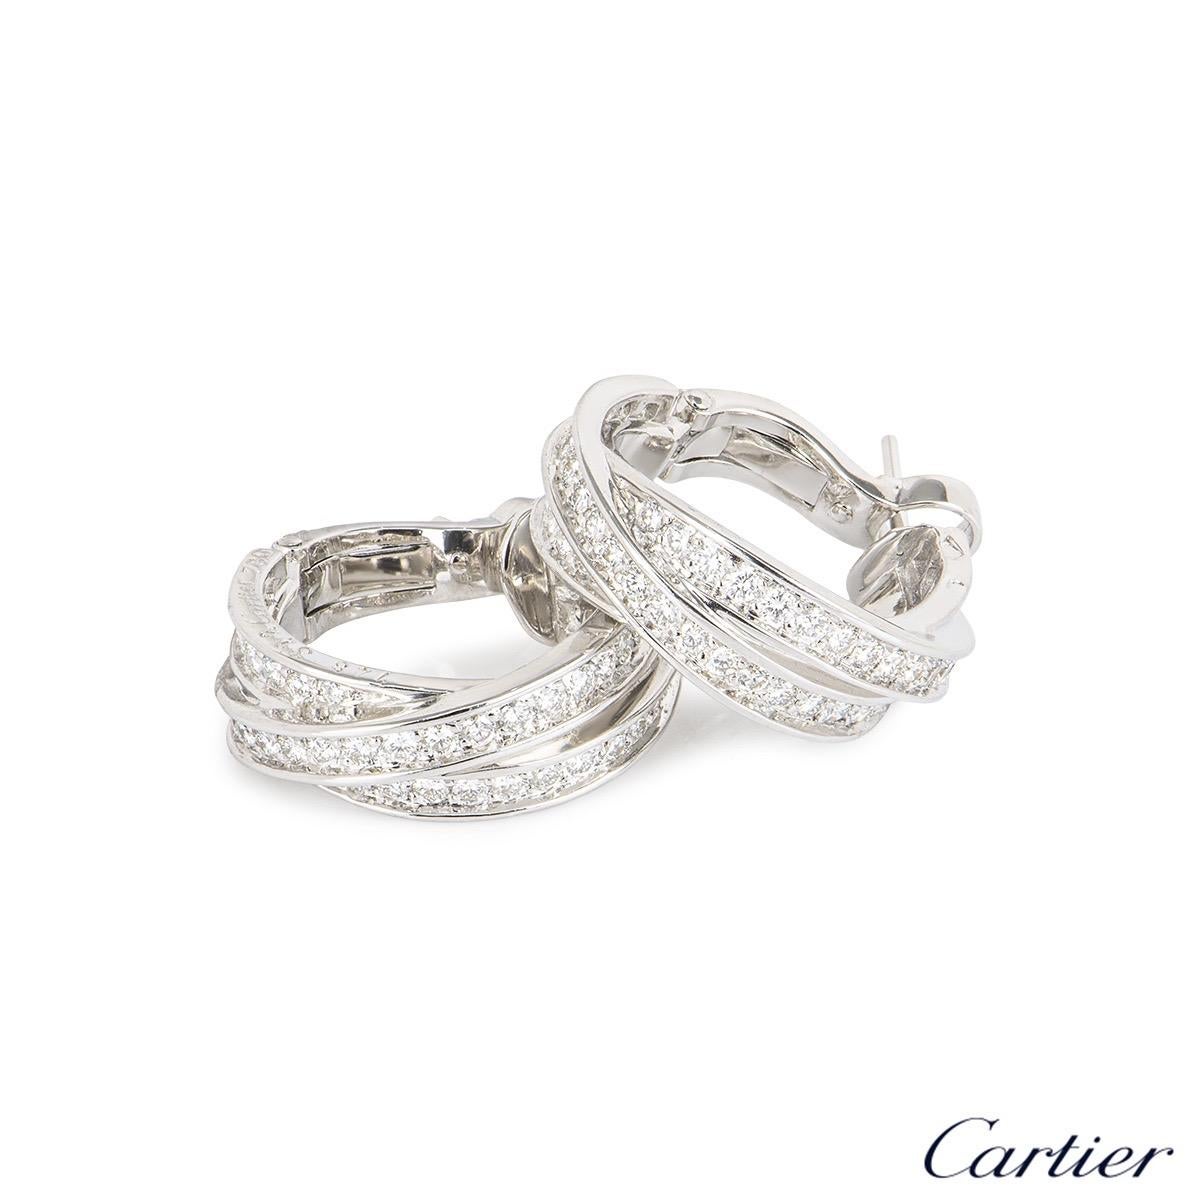 A sparkly pair of 18k white gold Cartier diamond hoop earrings from the Trinity de Cartier collection. The earrings comprise of 3 intertwined white gold bands with round brilliant cut diamonds pave set throughout. The diamonds have a total weight of